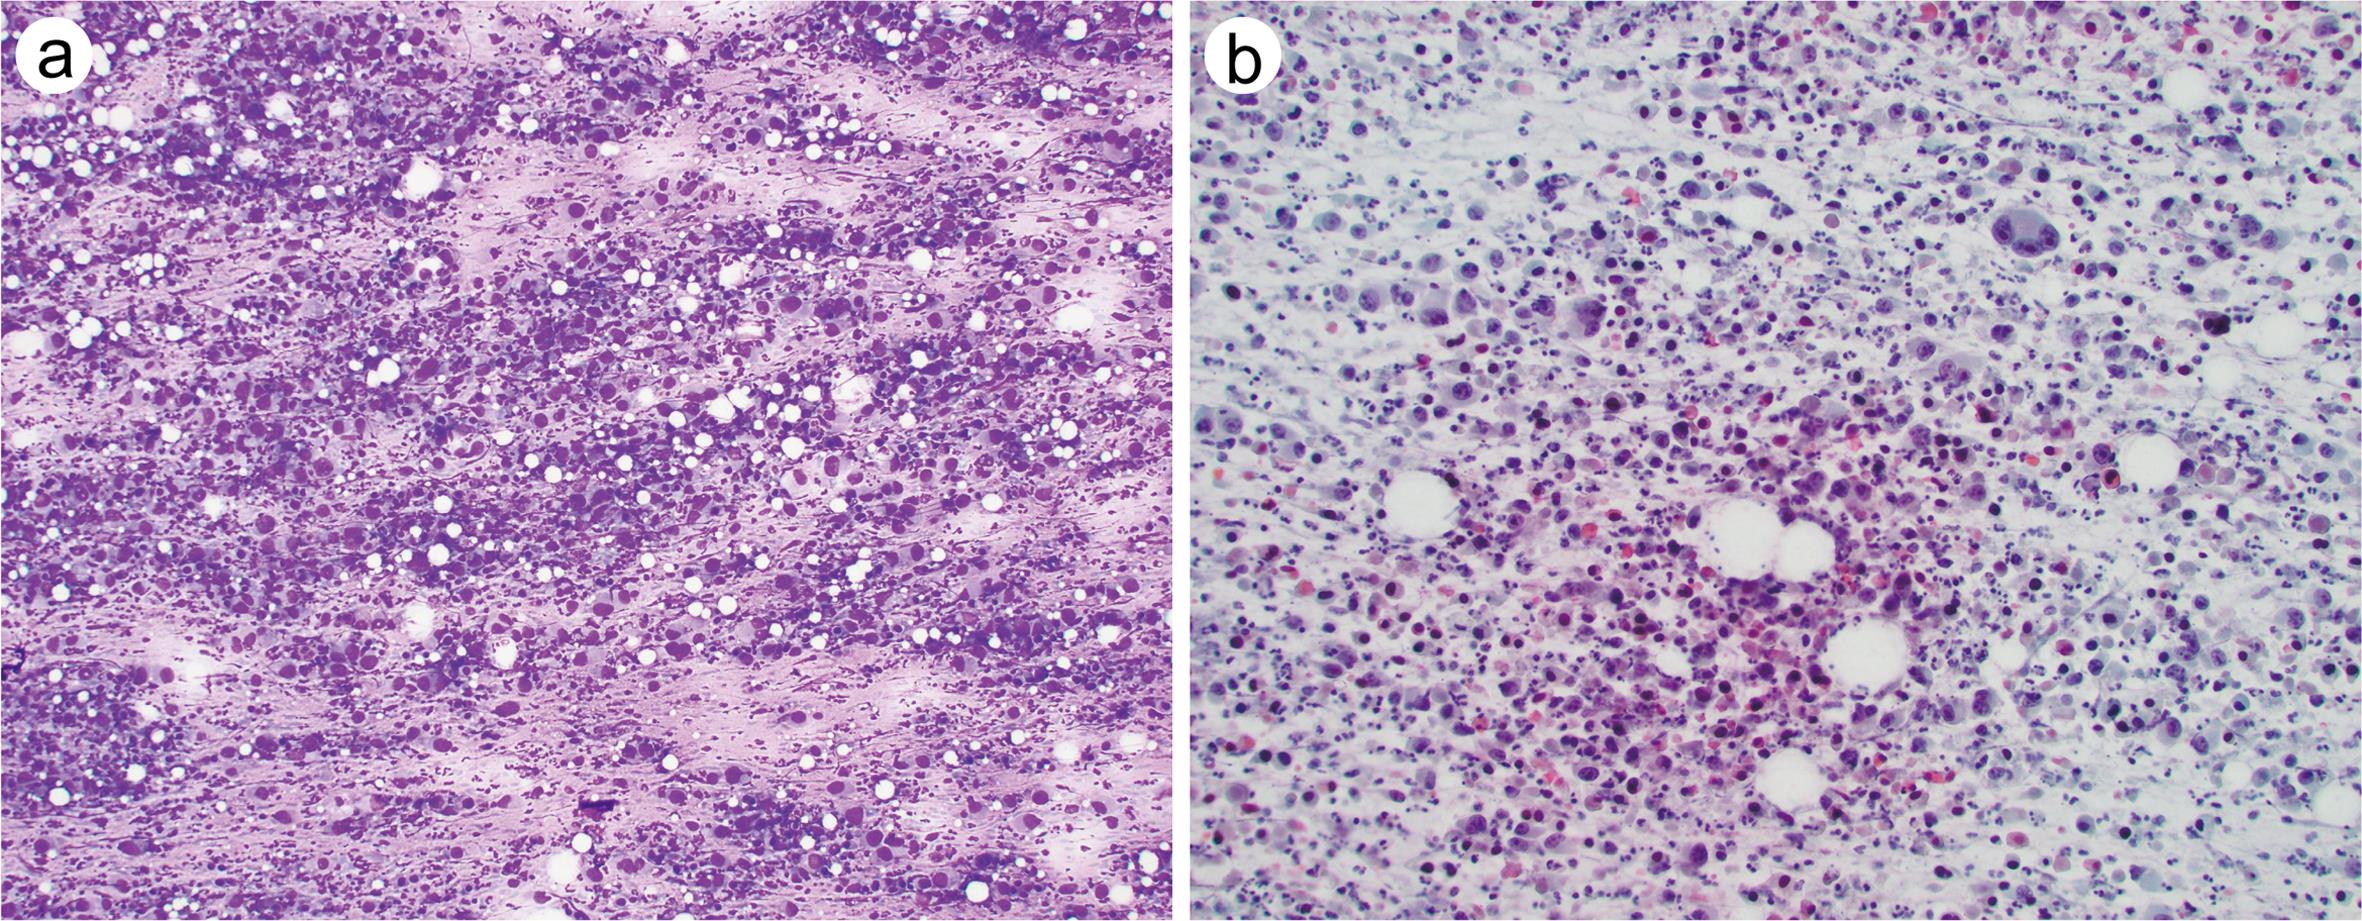 Cytology features of undifferentiated (anaplastic) thyroid carcinoma.